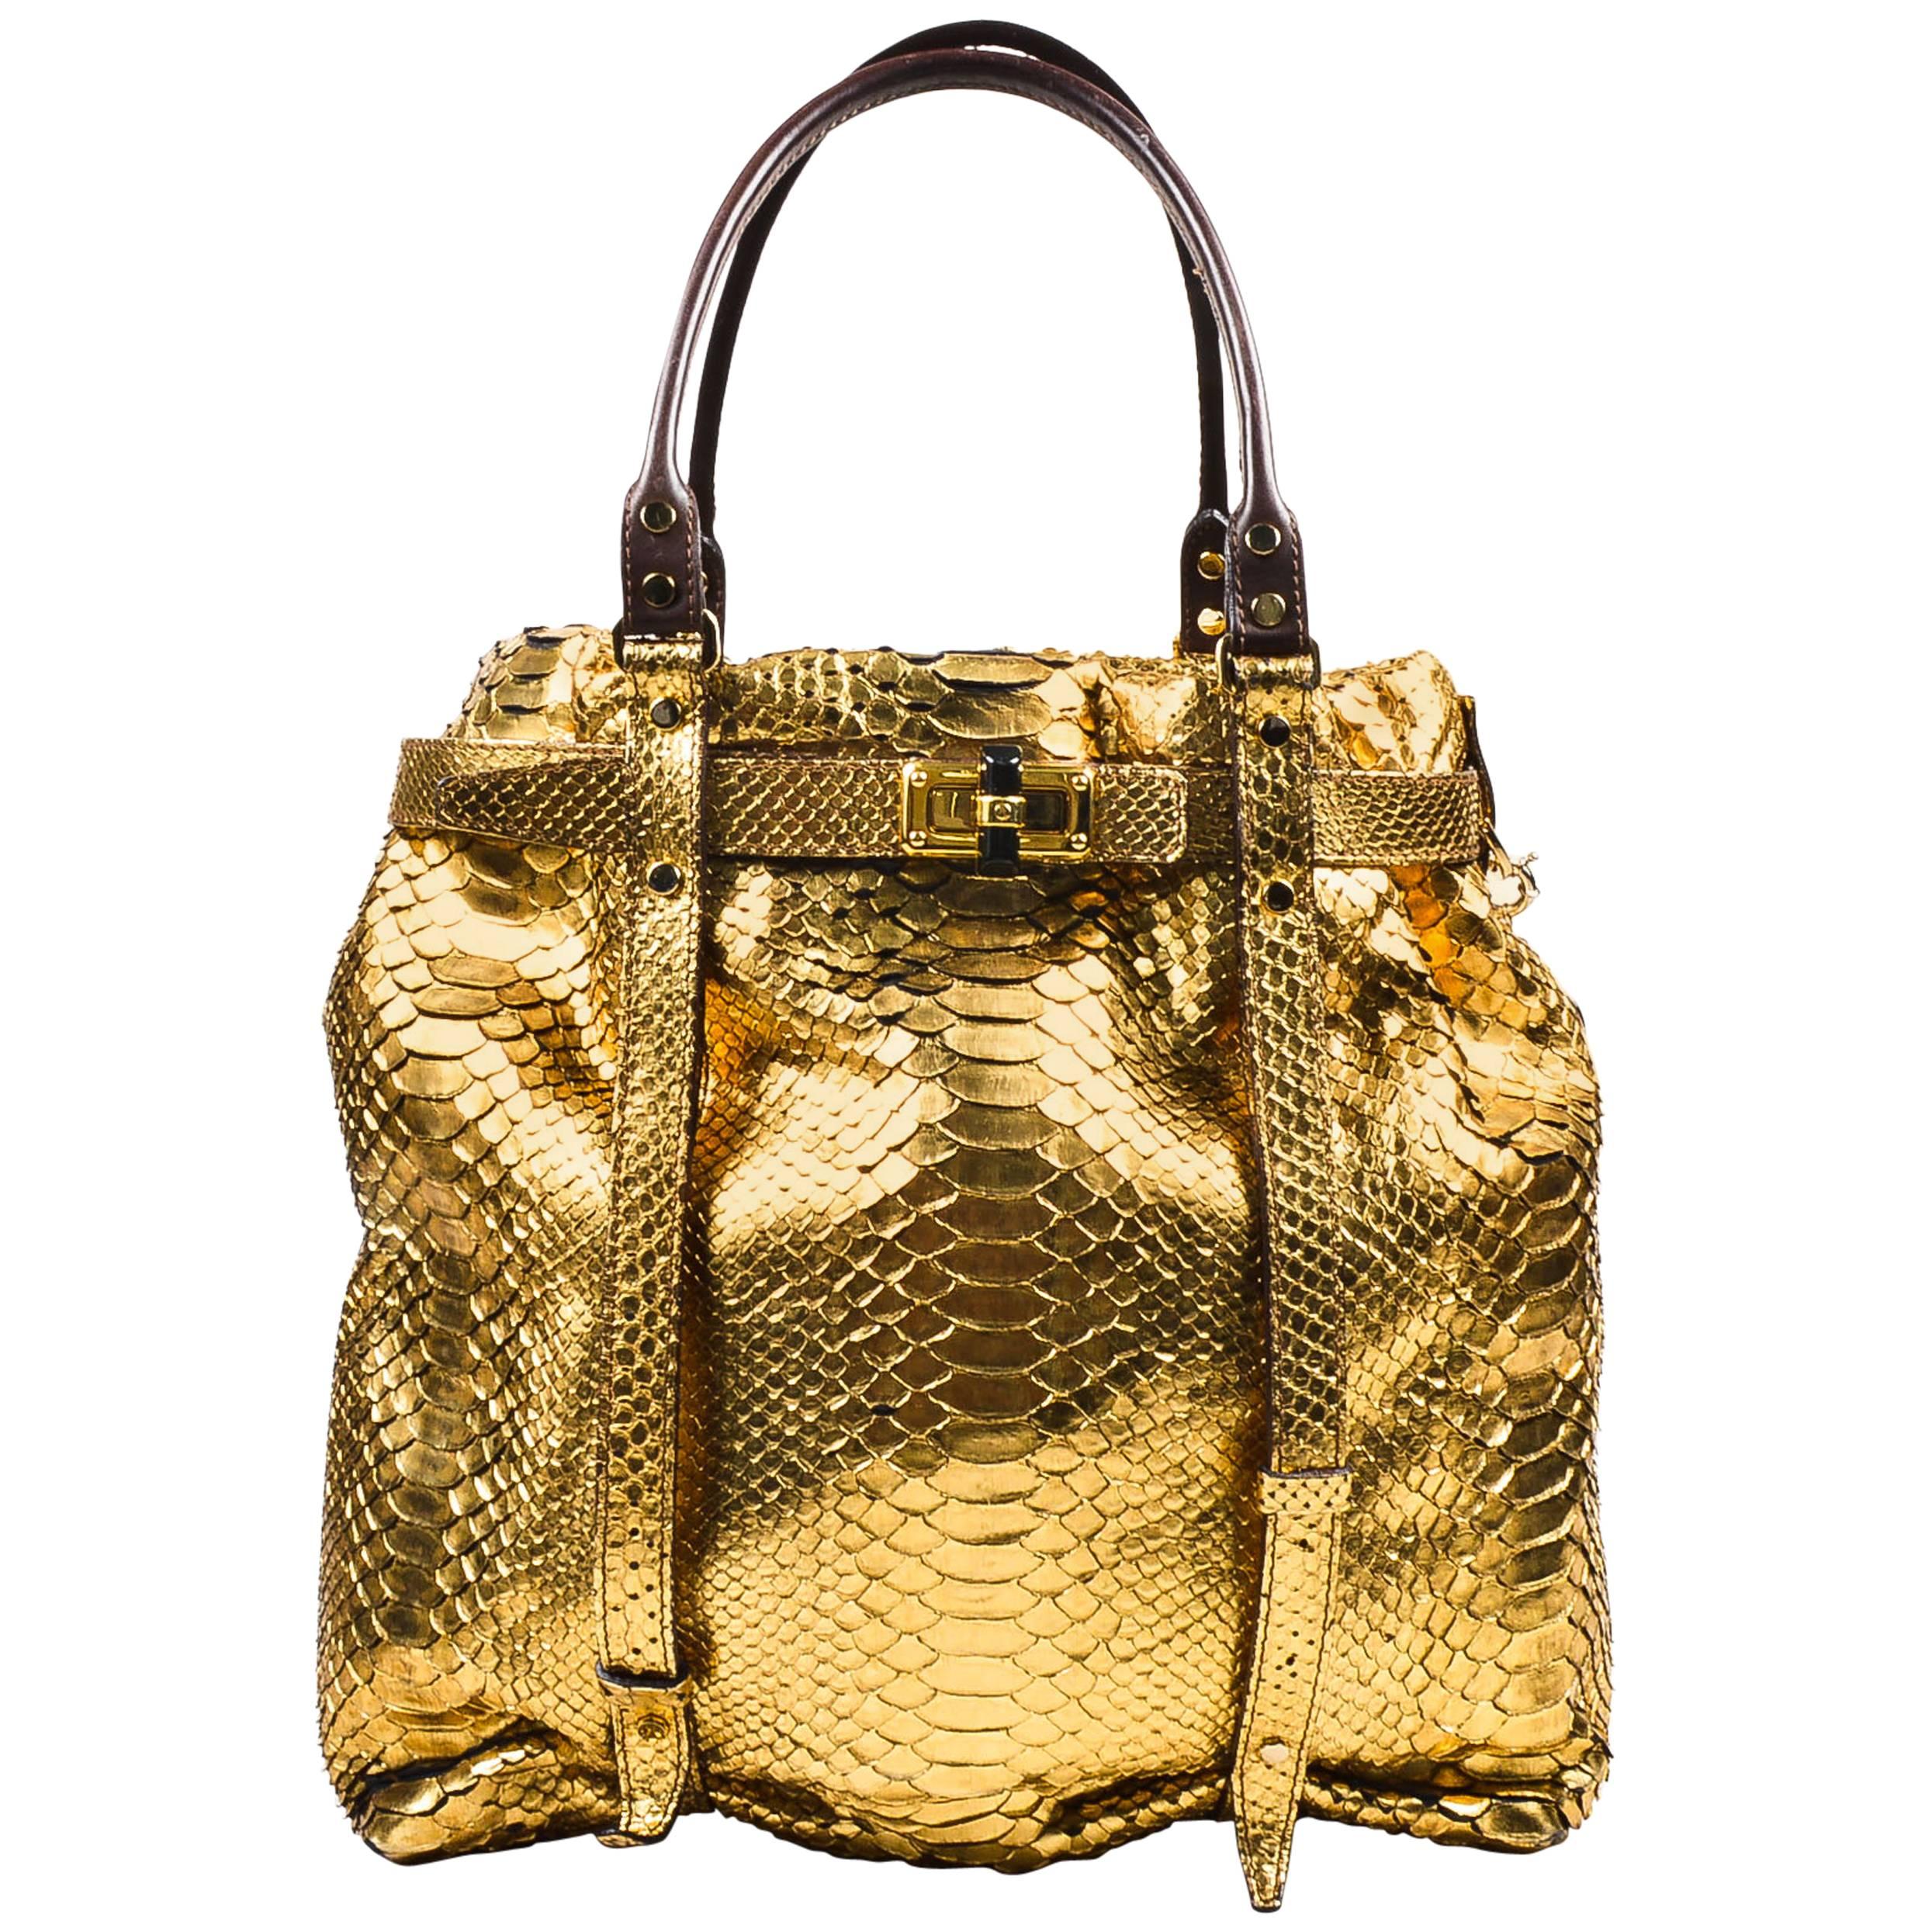 Lanvin New With Tag Metallic Gold Python Leather Trim "Kansas" Tote Bag For Sale